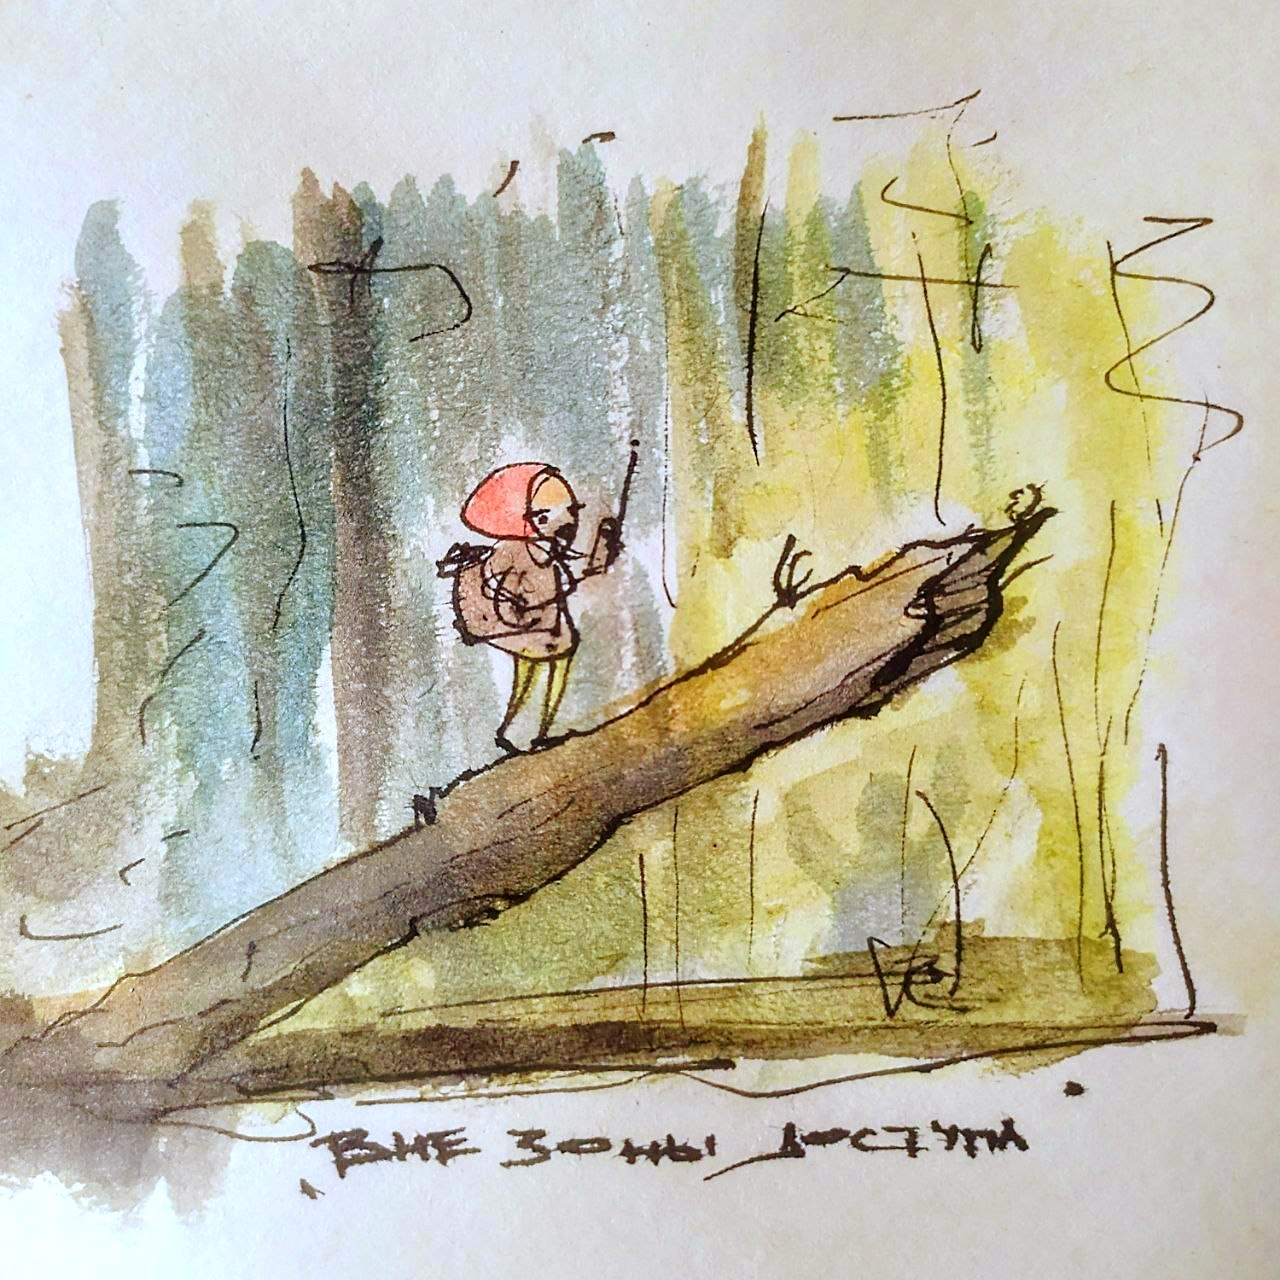 Out of Access - Lost in the Forest - My, Watercolor, Art, Illustrations, Comics, Drawing, Story, Sketch, Thicket